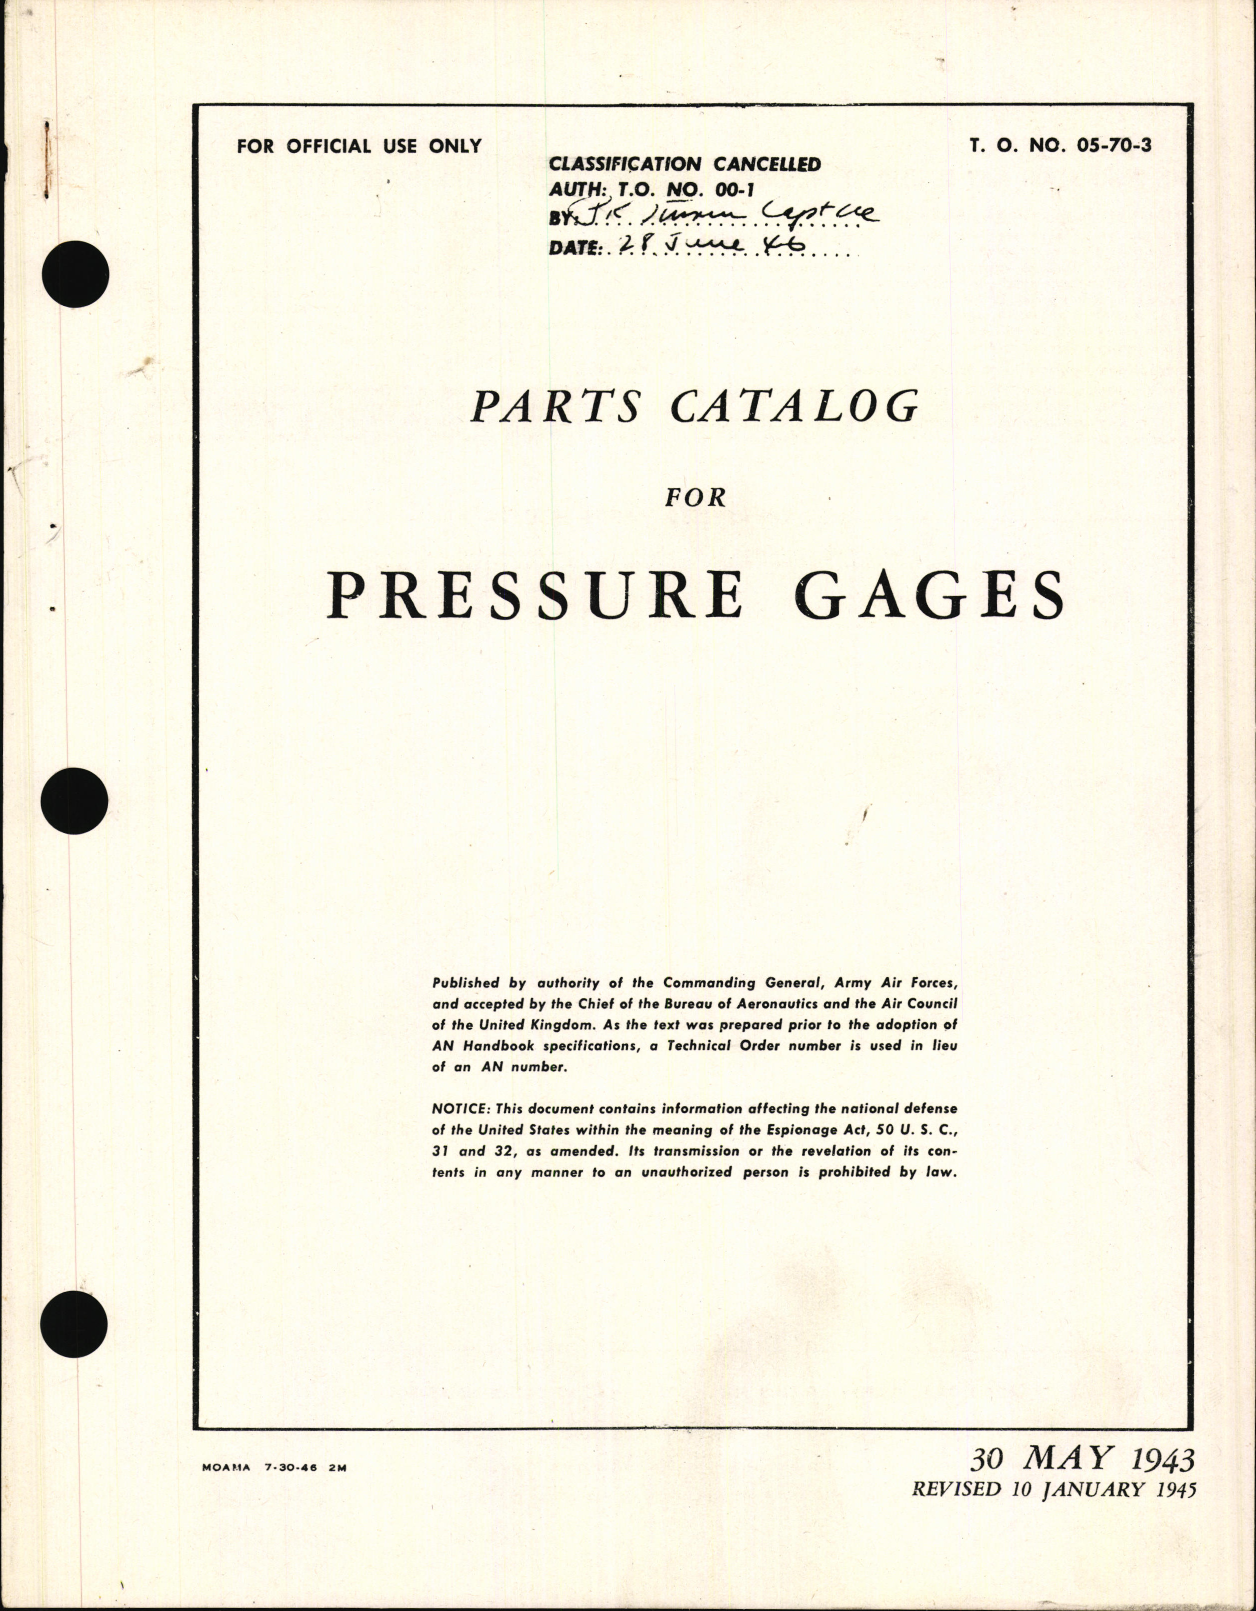 Sample page 7 from AirCorps Library document: Parts Catalog for Pressure Gages